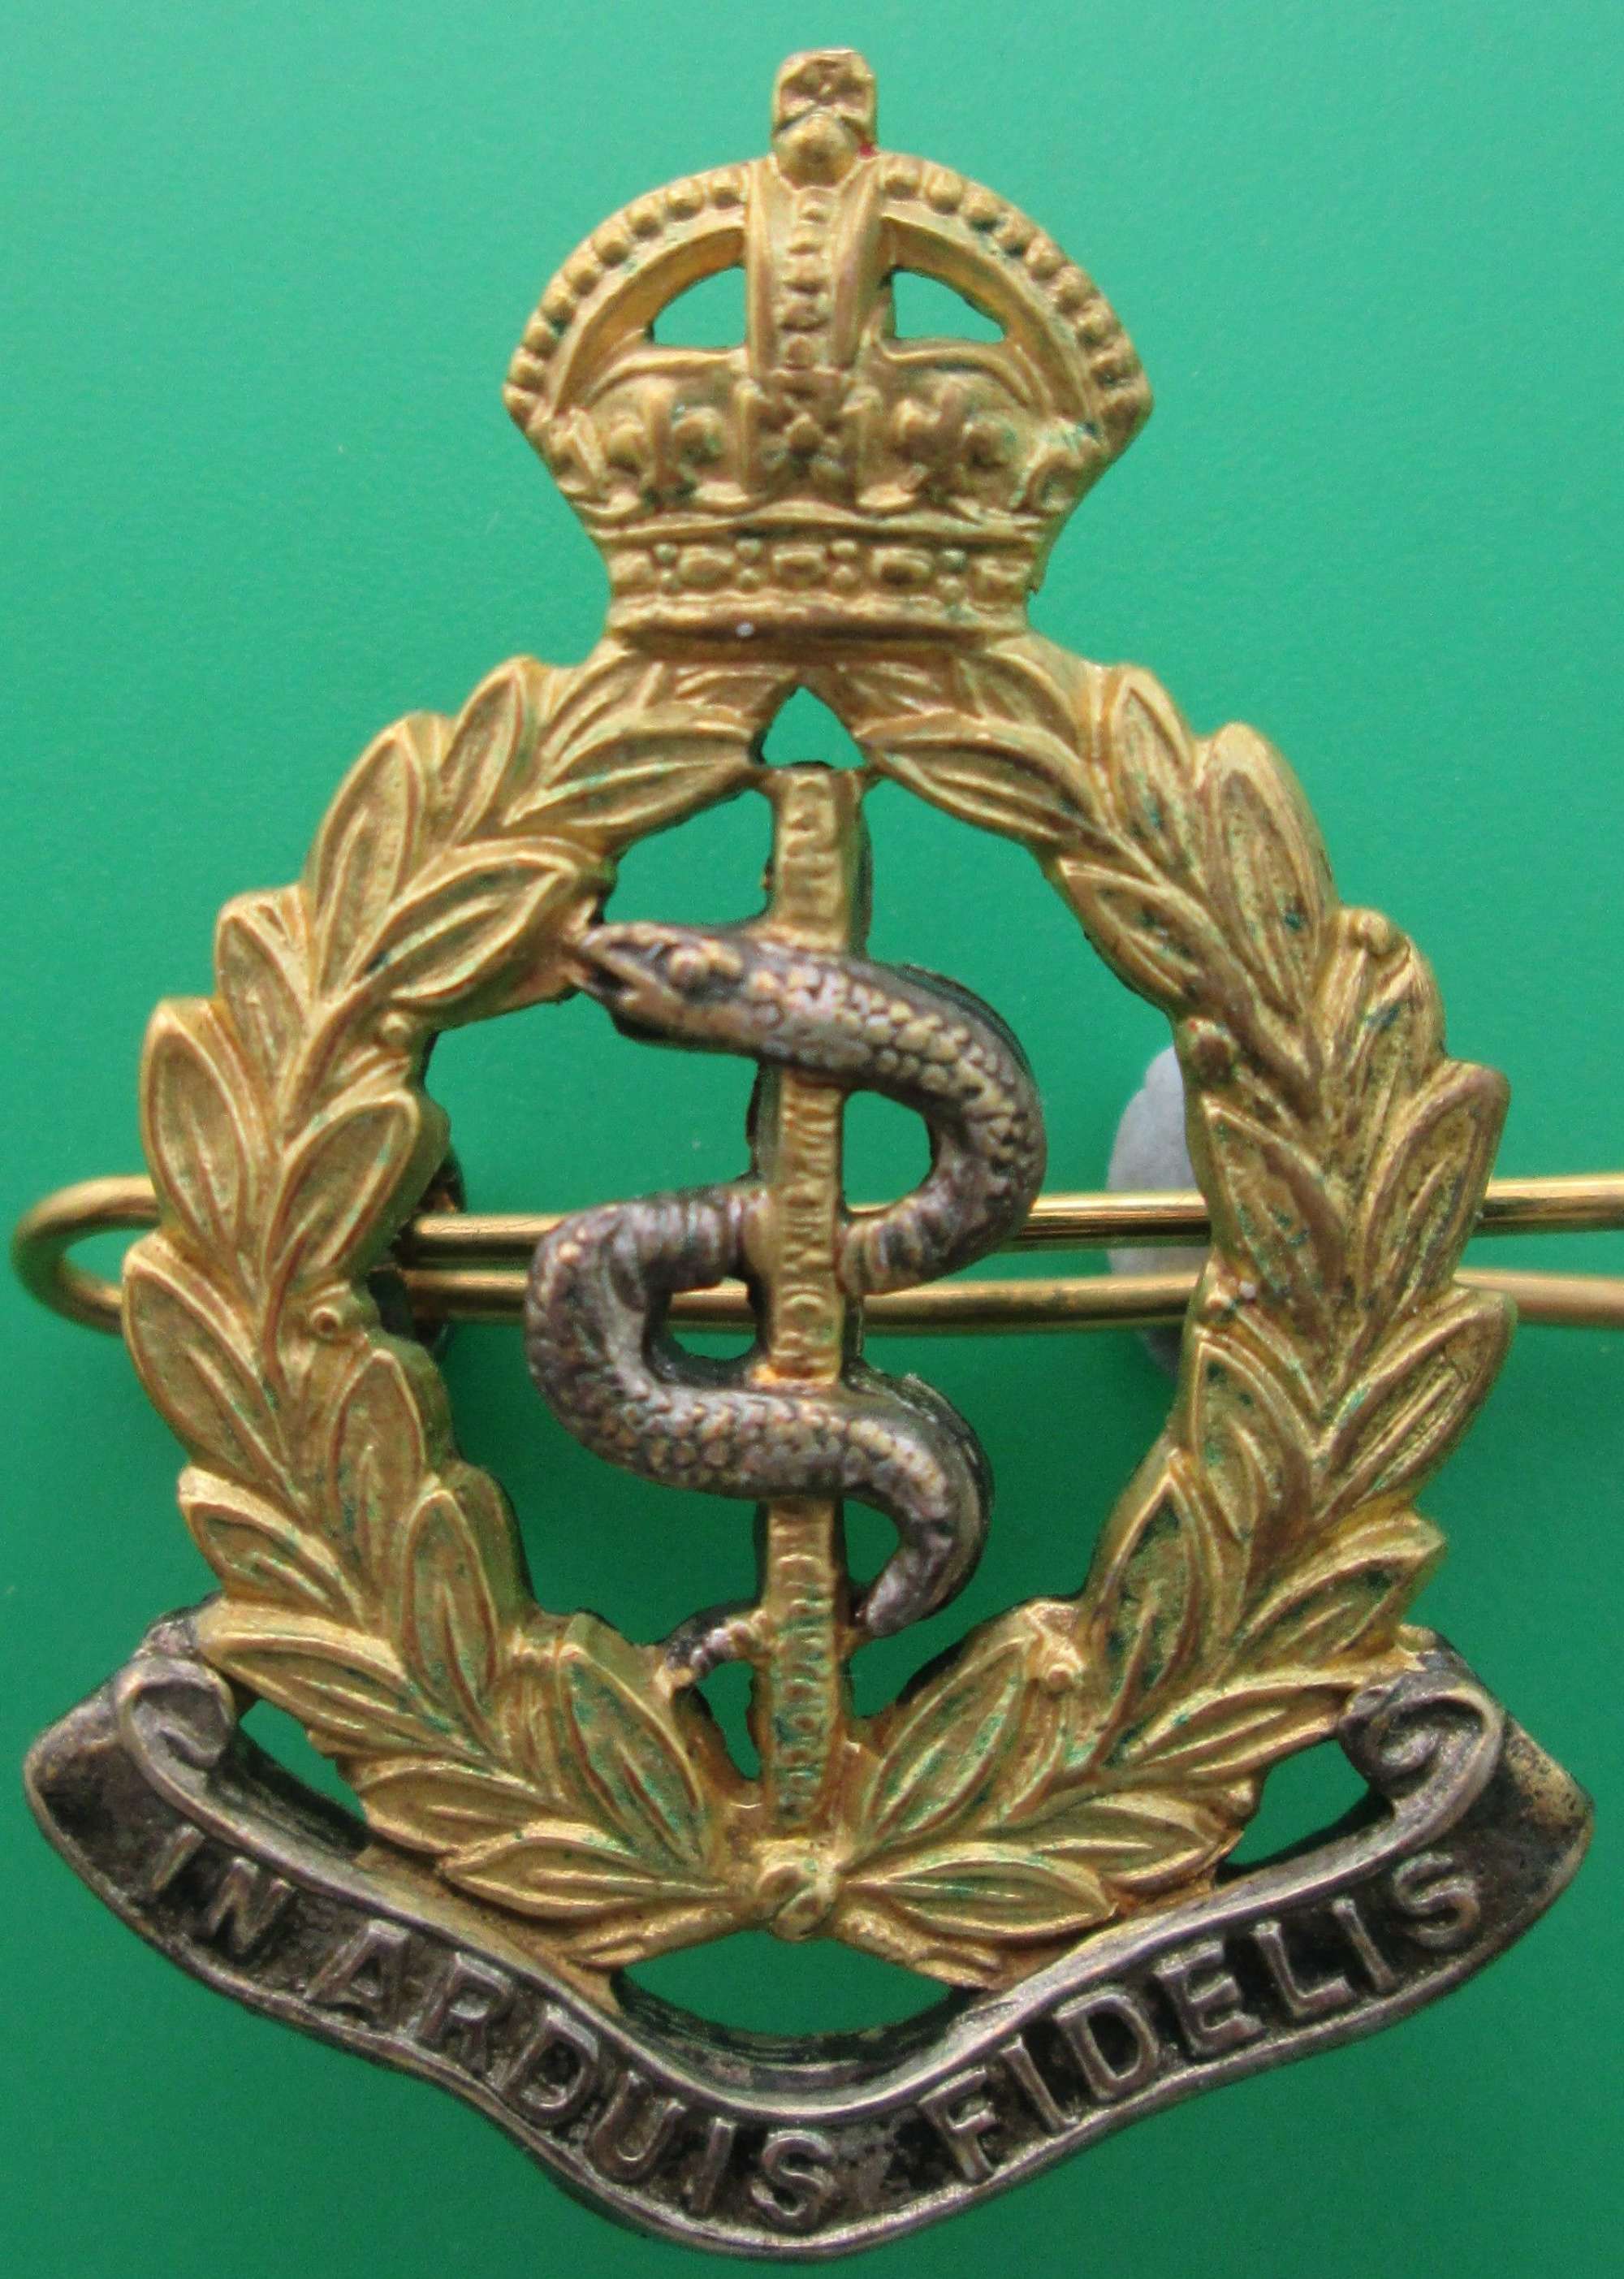 A SILVER AND GILT OFFICER'S RAMC CAP BADGE